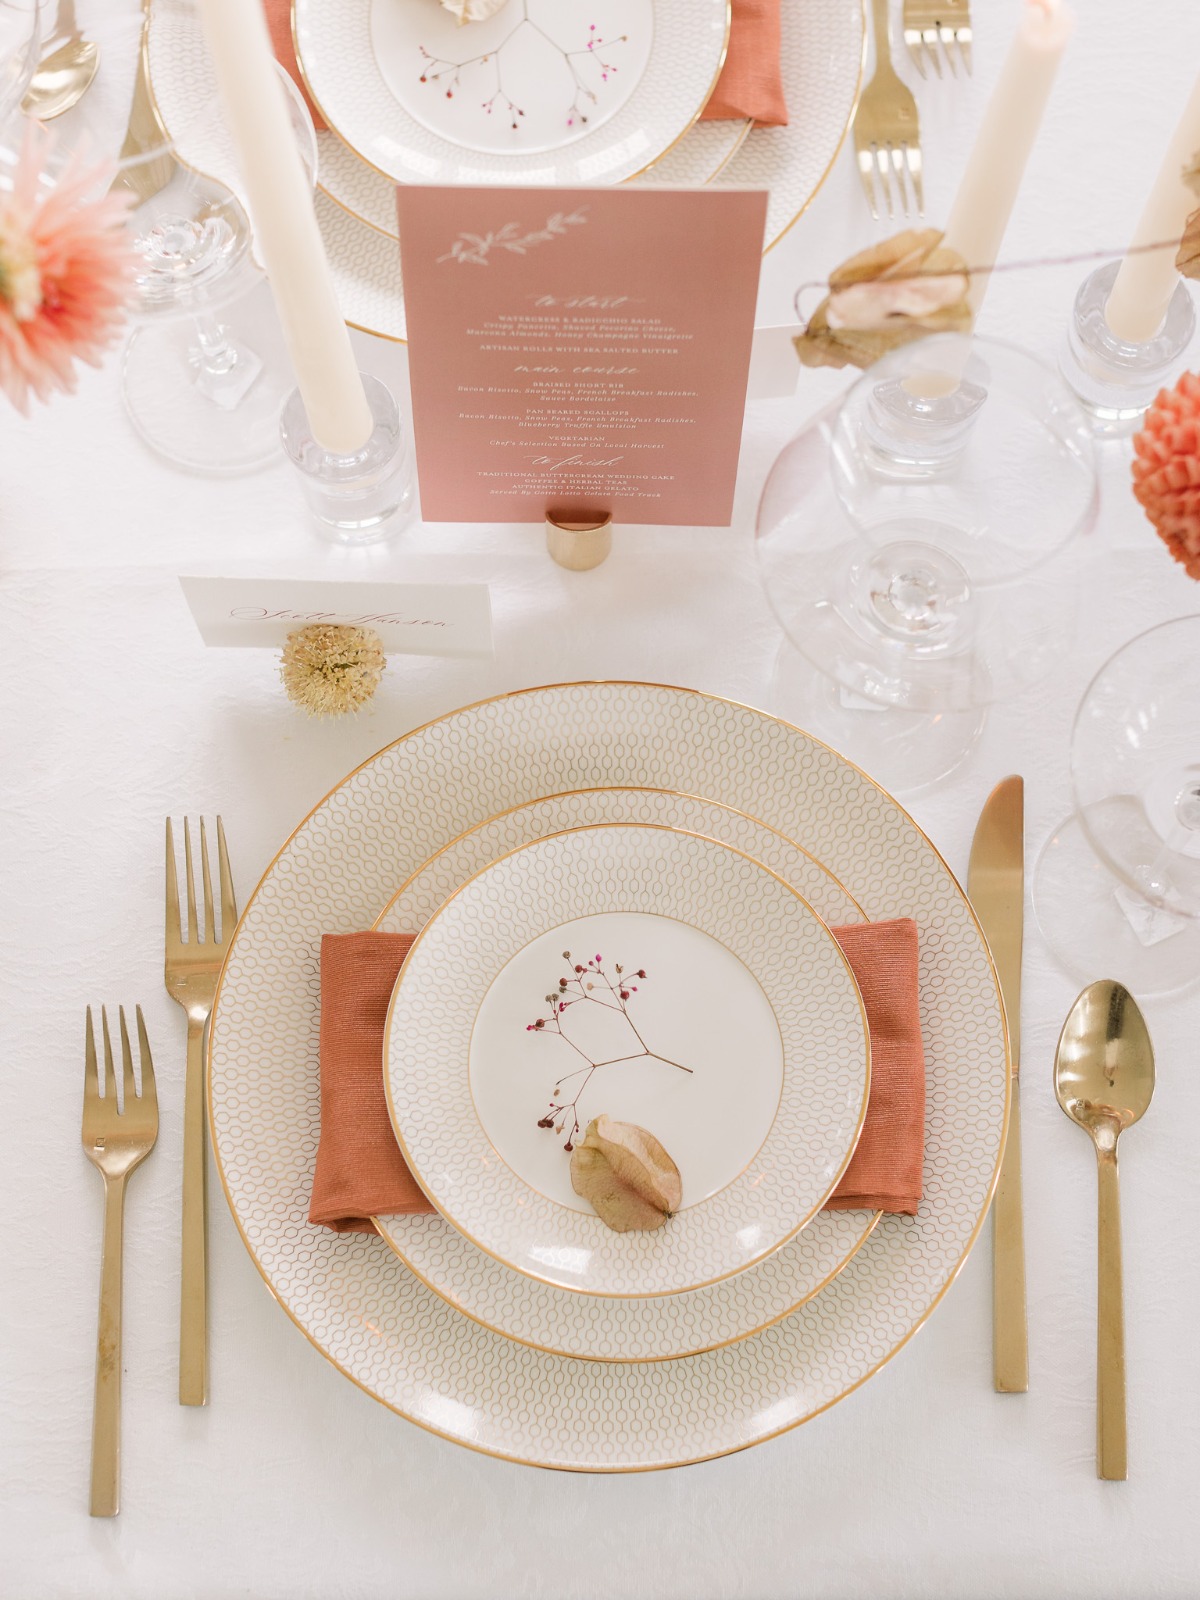 A warm, romantic, and refined fall wedding palette